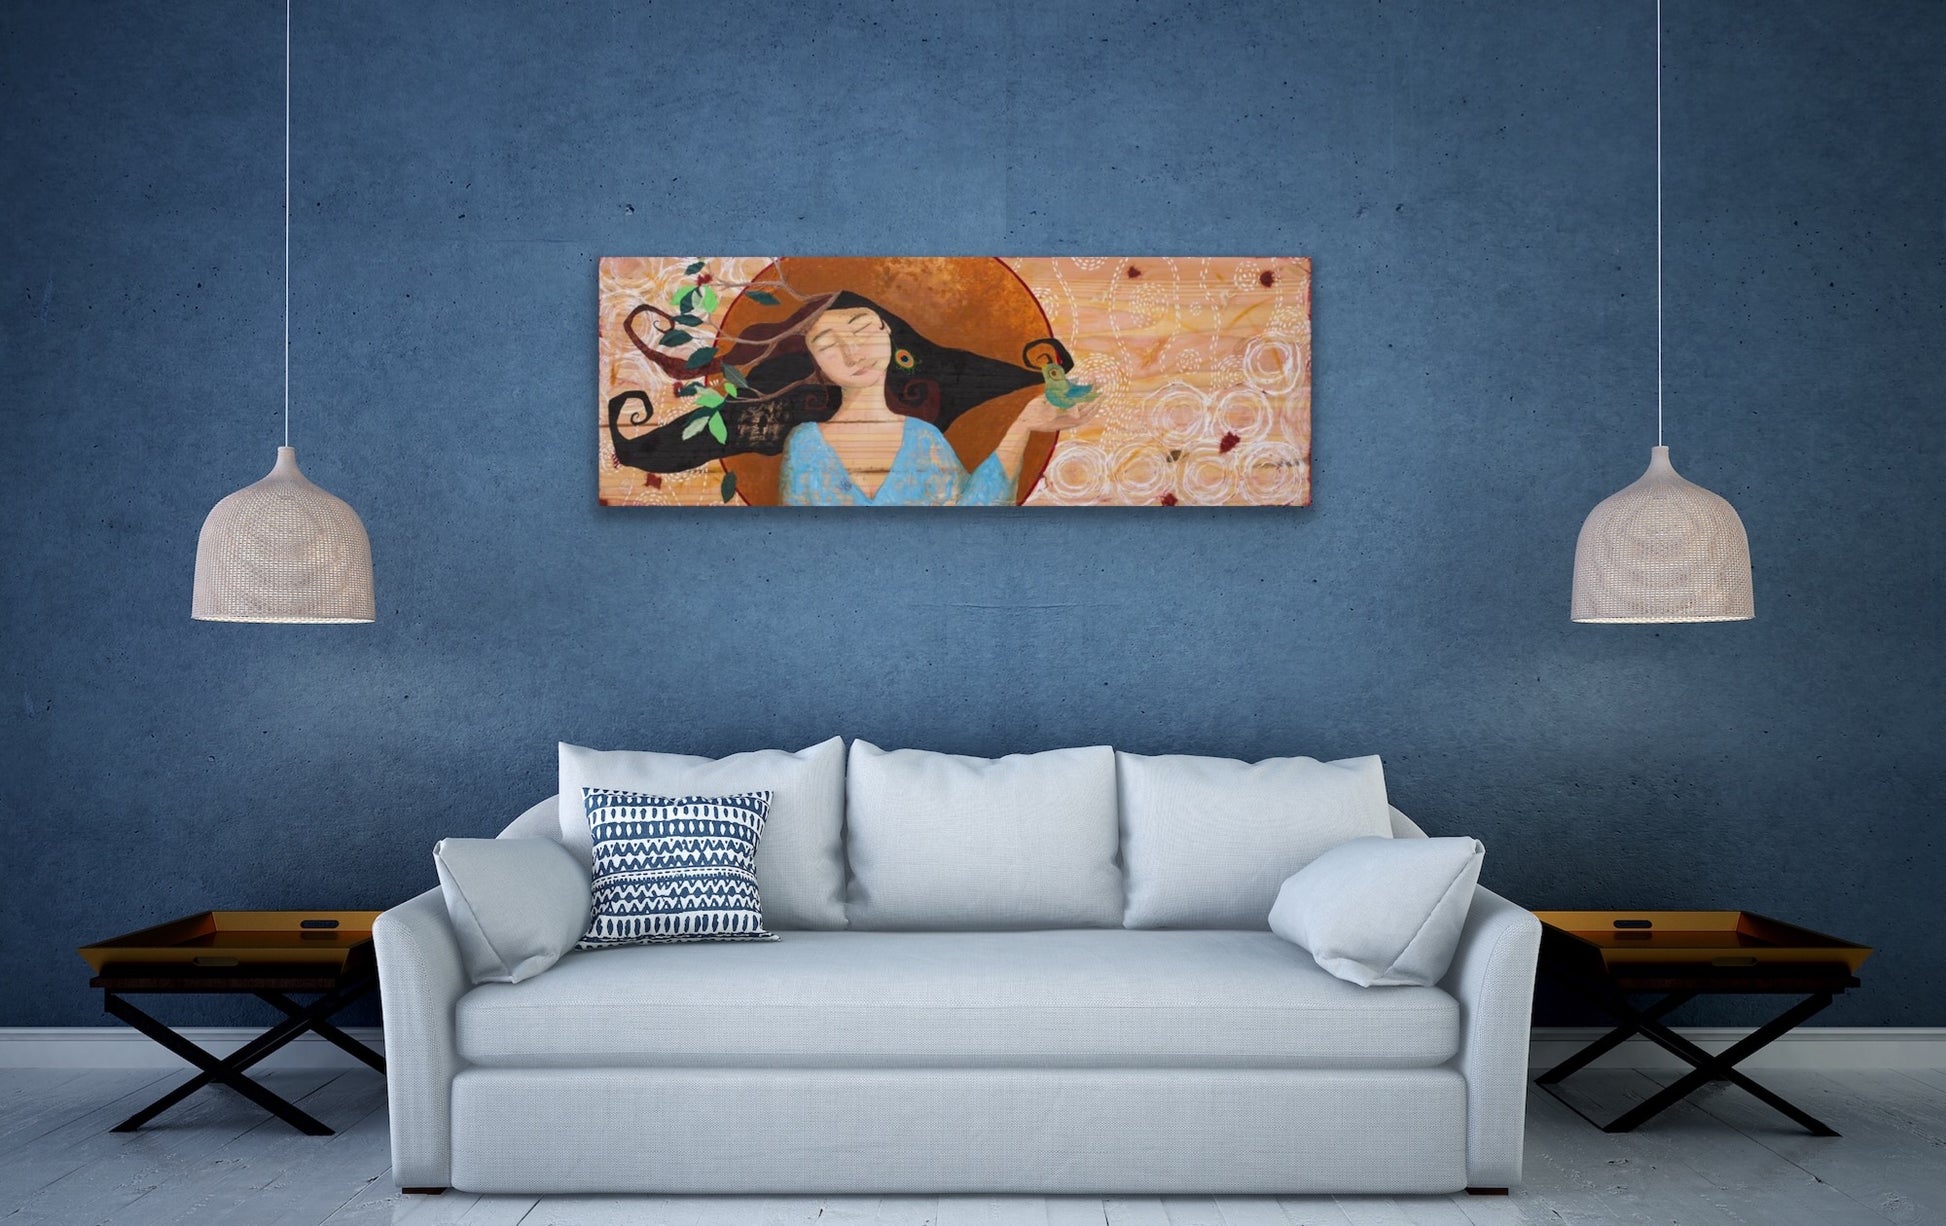 mixed media painting of a woman on wood hanging on a blue wall in a living room with hanging lamps, a white couch, and wooden side tables